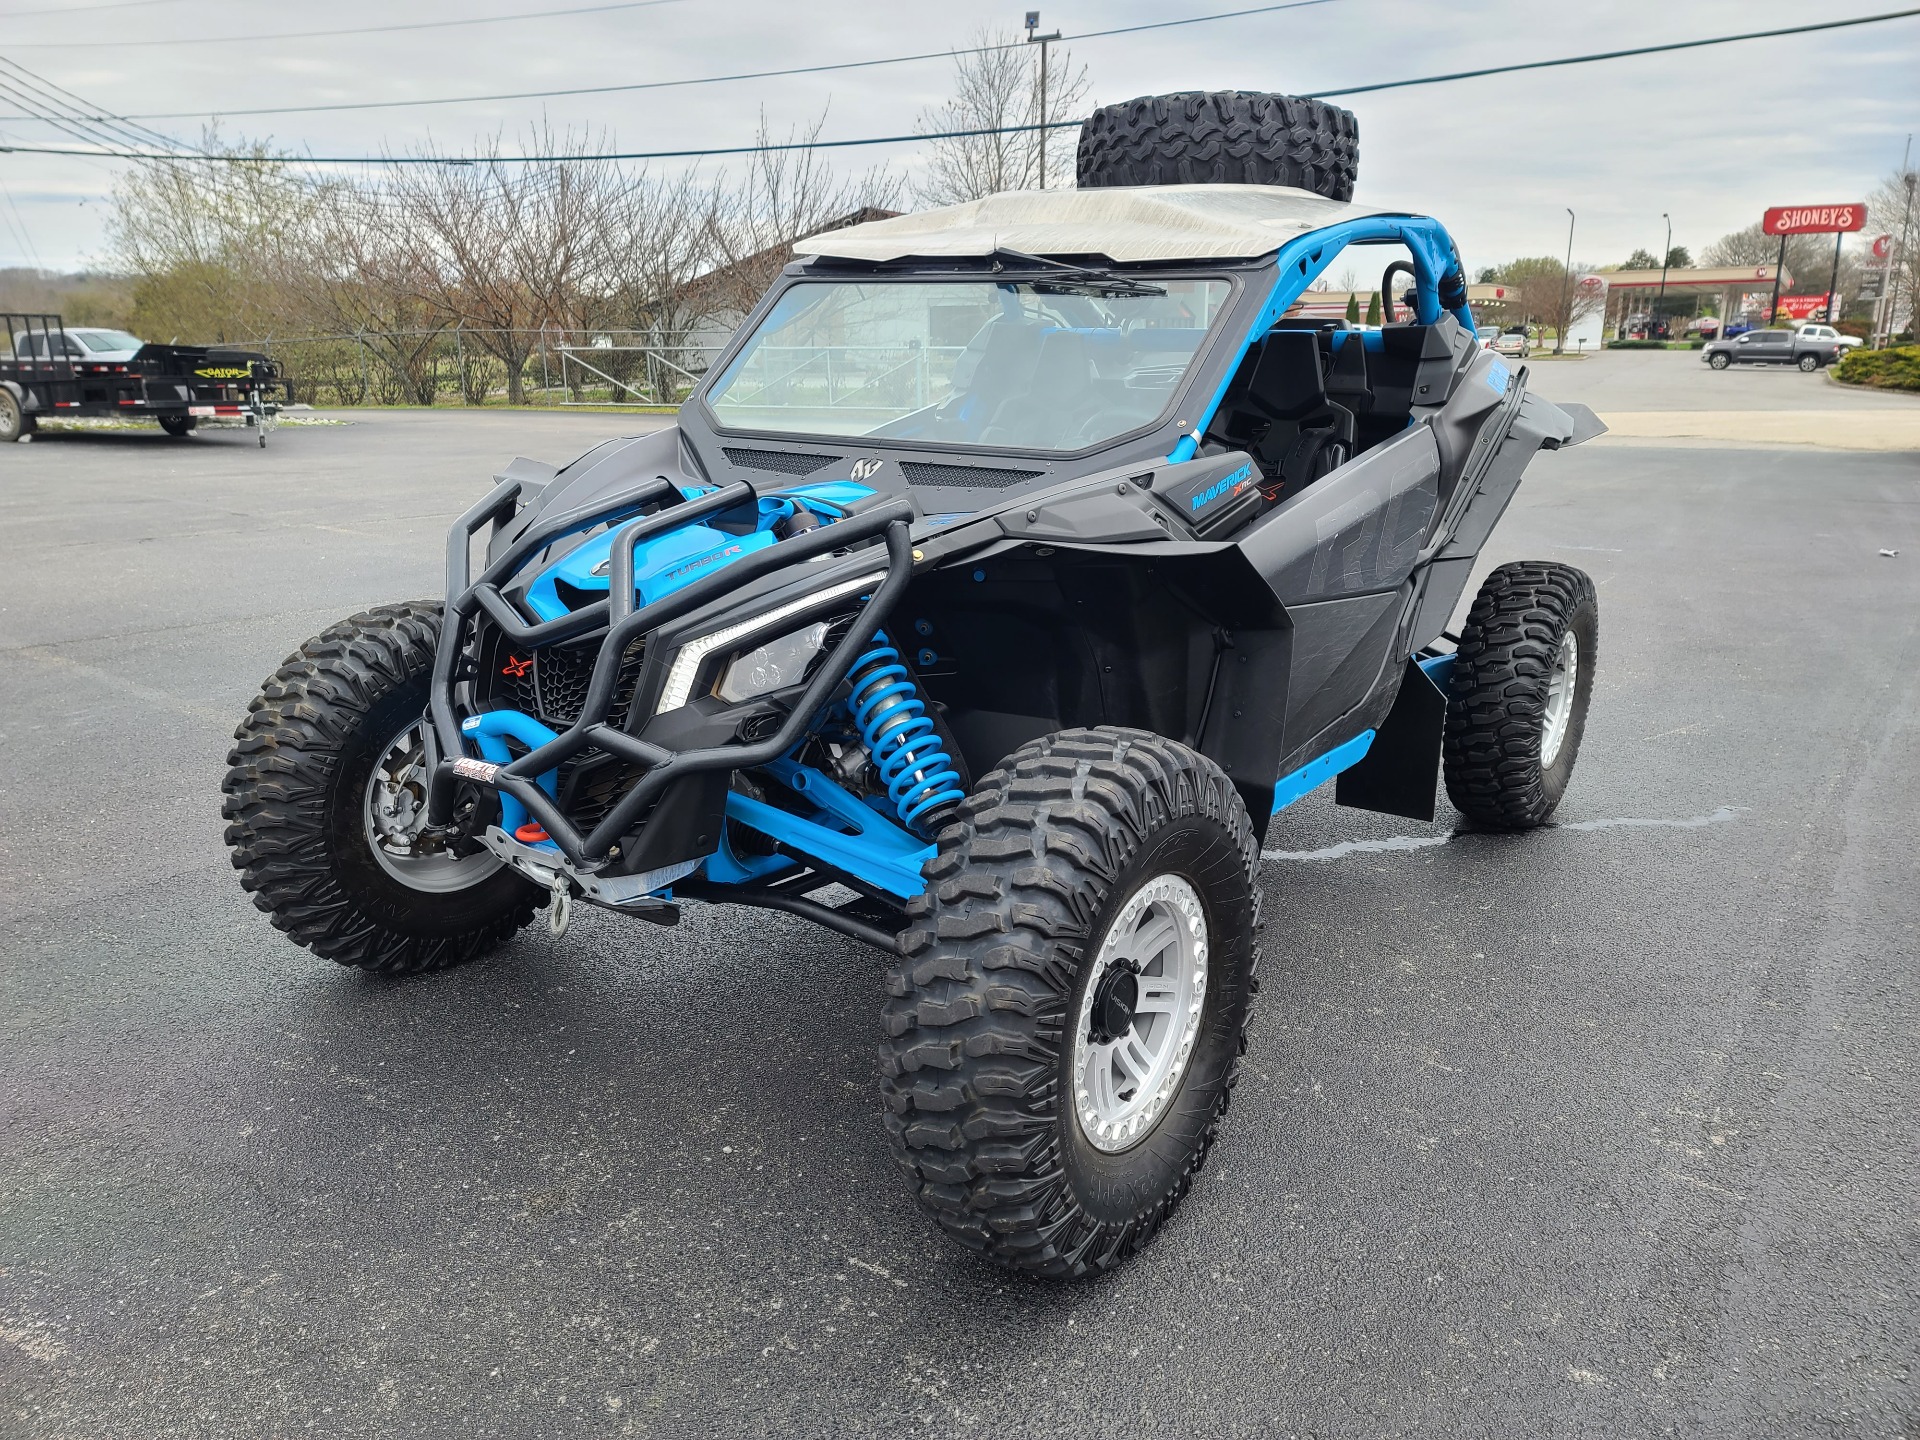 2019 Can-Am Maverick X3 X rc Turbo R in Clinton, Tennessee - Photo 3